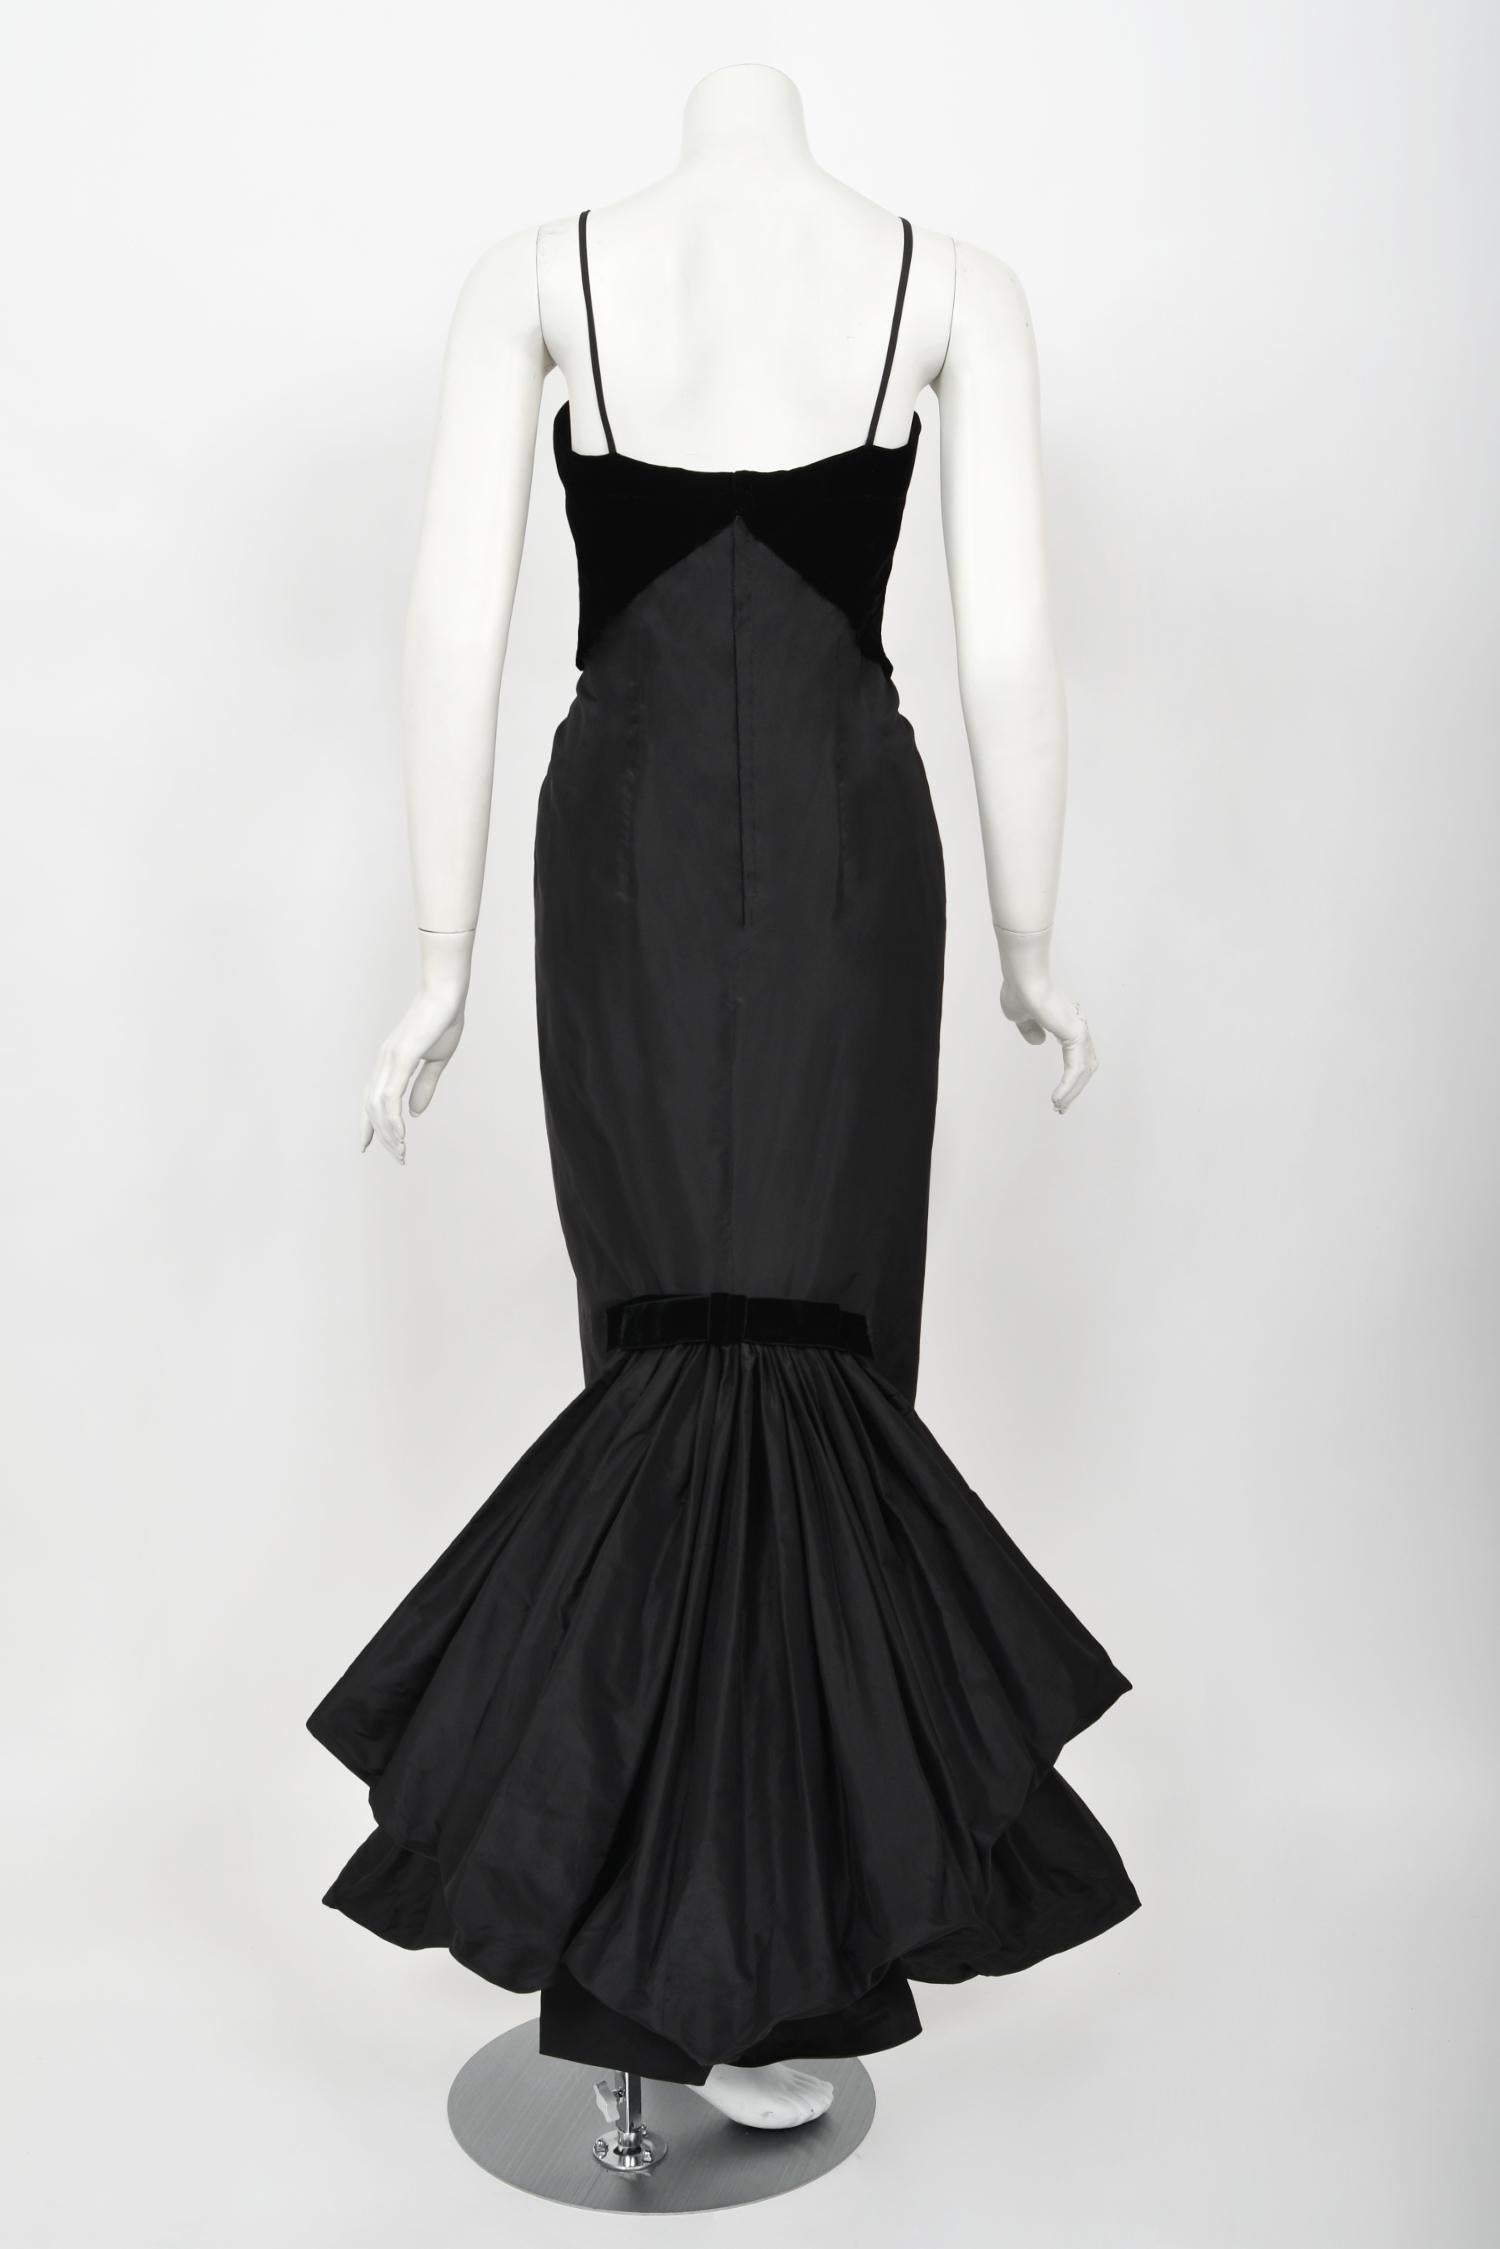 Vintage 1950's Philip Hulitar Old Hollywood Black Silk Hourglass Fishtail Dress For Sale 6